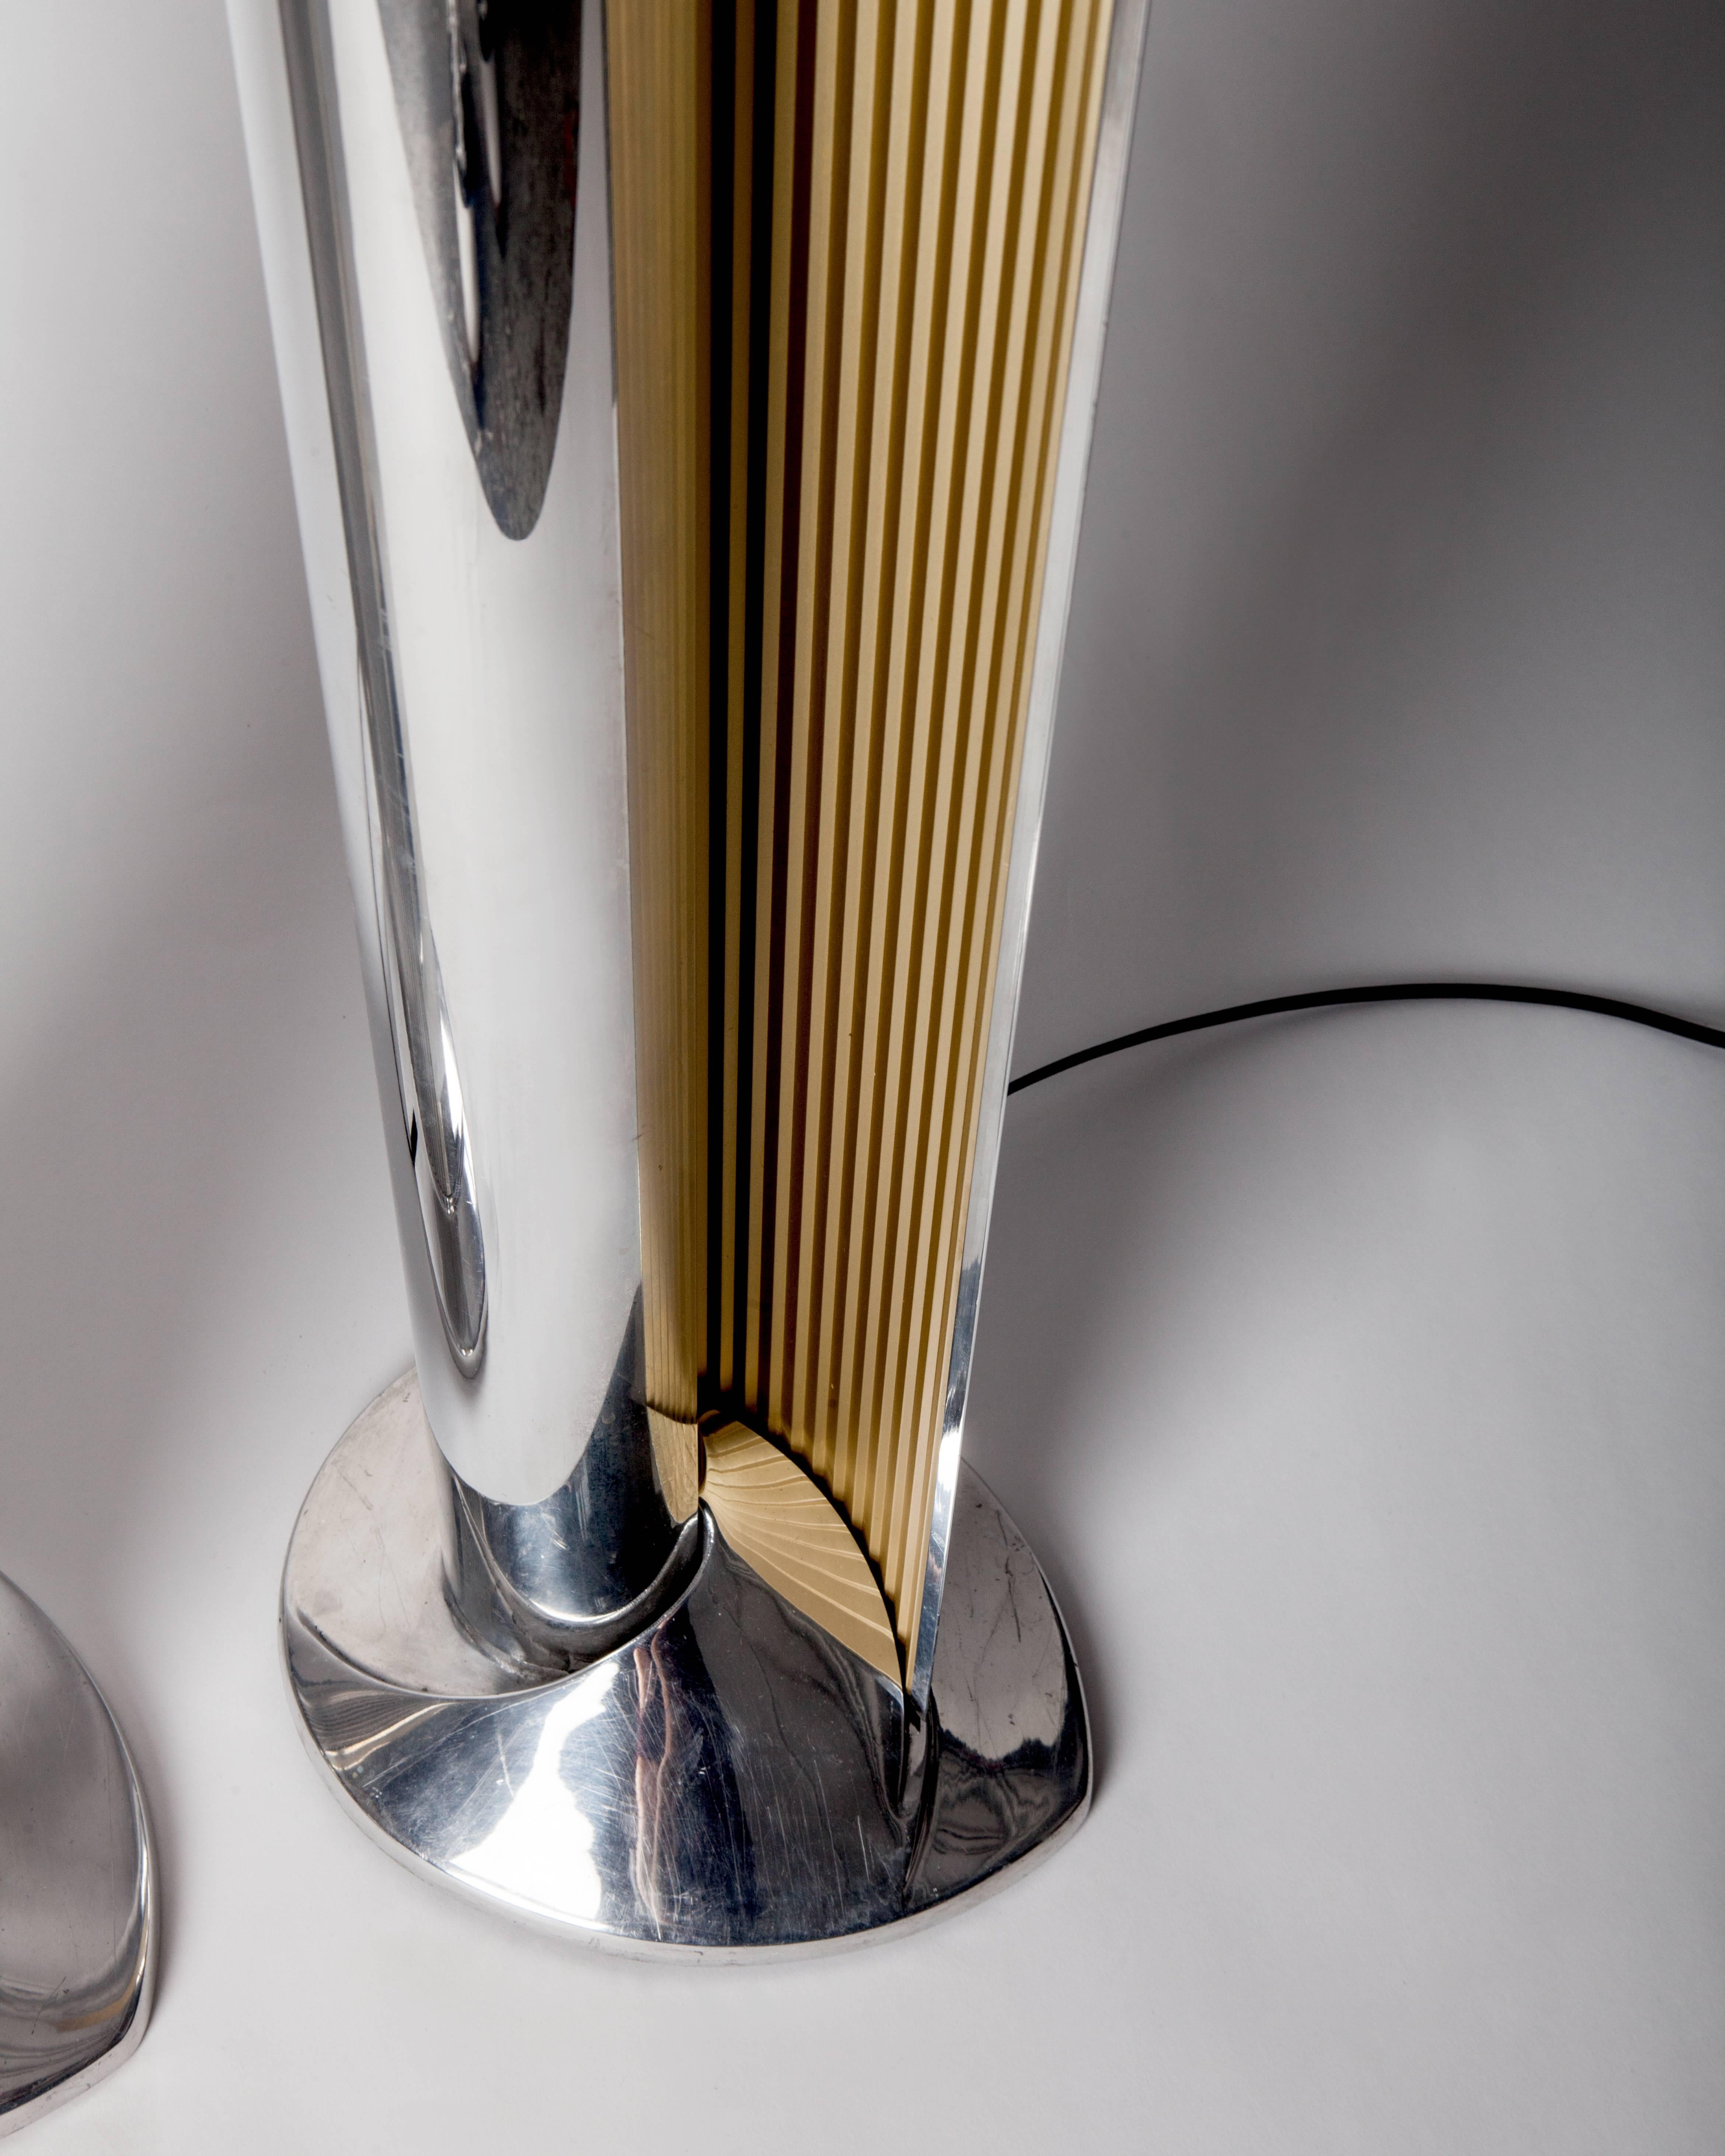 AFL1833.
A pair of tall vintage floor lamps in polished aluminum with serrated gold reflectors. These lamps hold long LED tubes at the center of a nautilus spiral which indirectly casts light via the unfurled opening on teardrop-shaped bases.